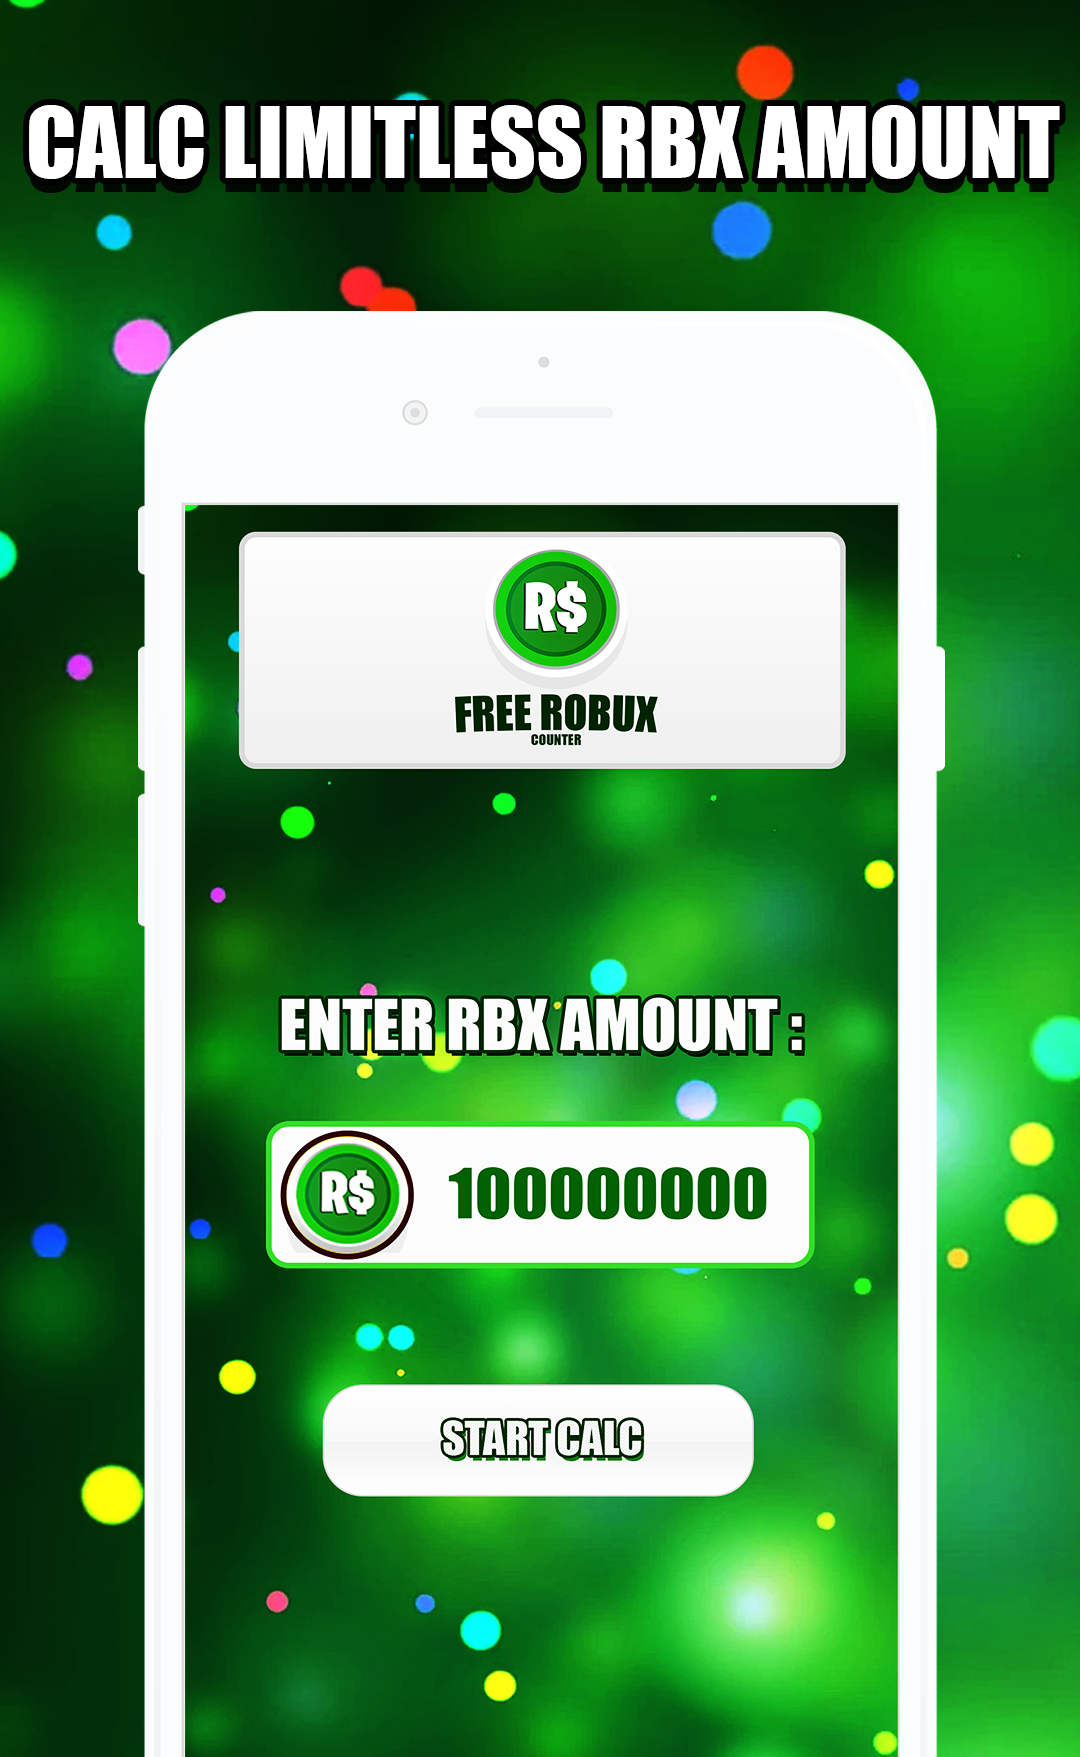 Free Robux Calc For Roblox S Rbx 2020 Pre Register Download - robux screenshot 2020